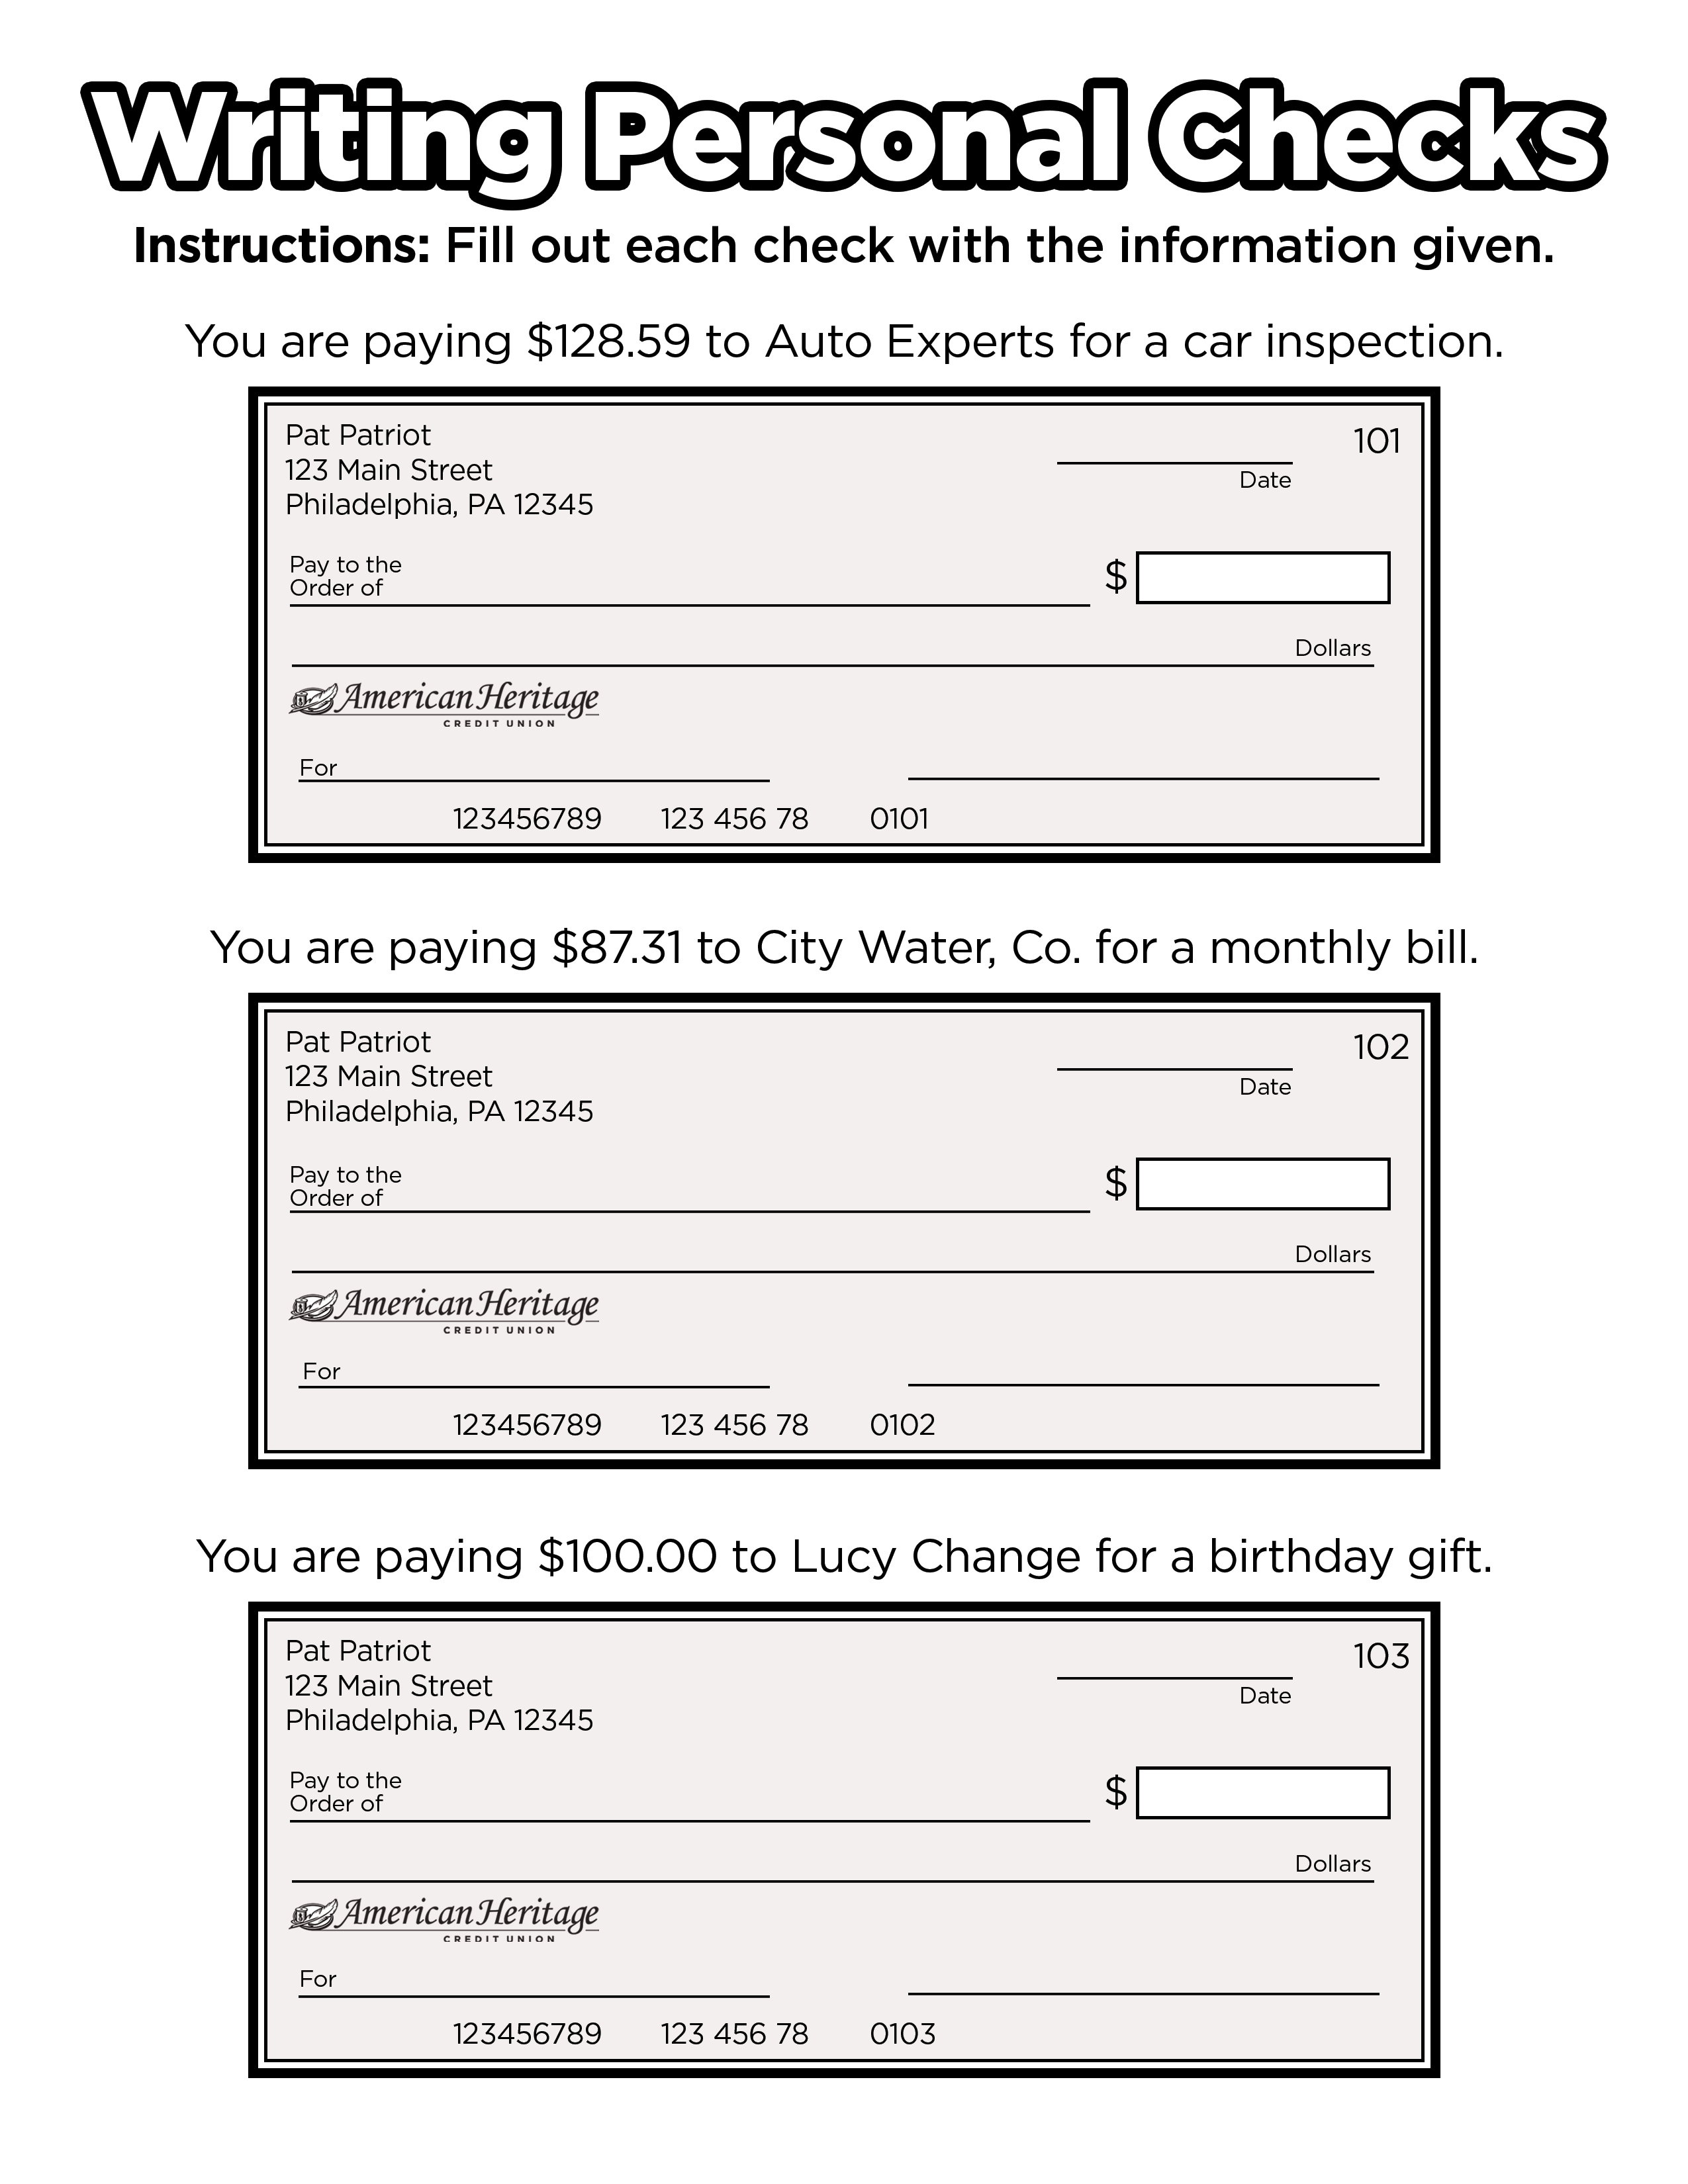 Practice writing personal checks with this worksheet